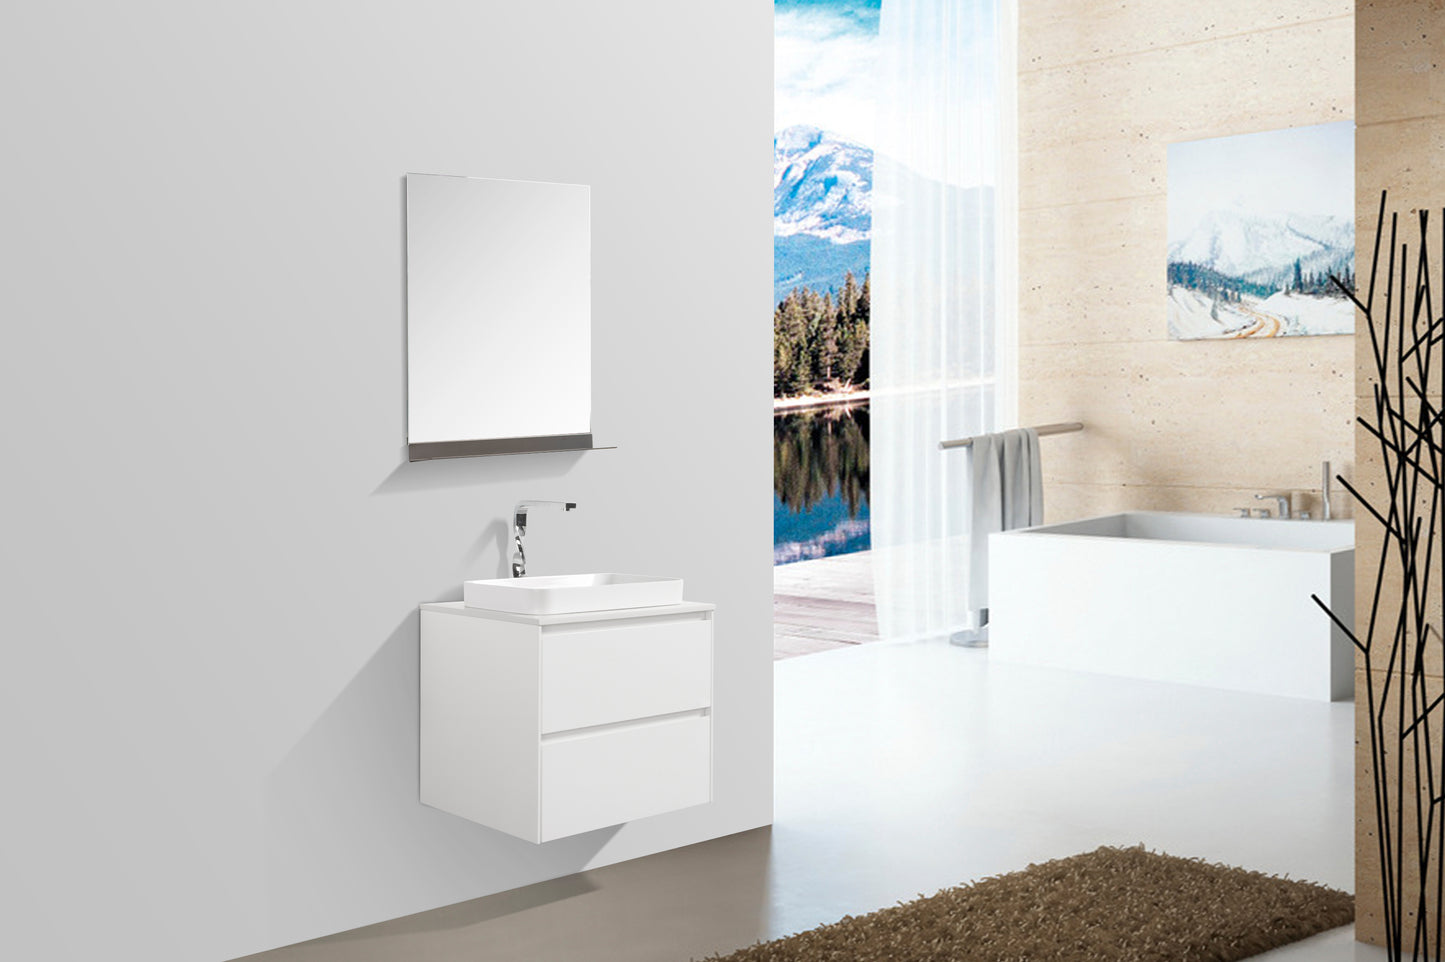 Madrid Double Drawer Vanity Cabinet-no basin 600mm